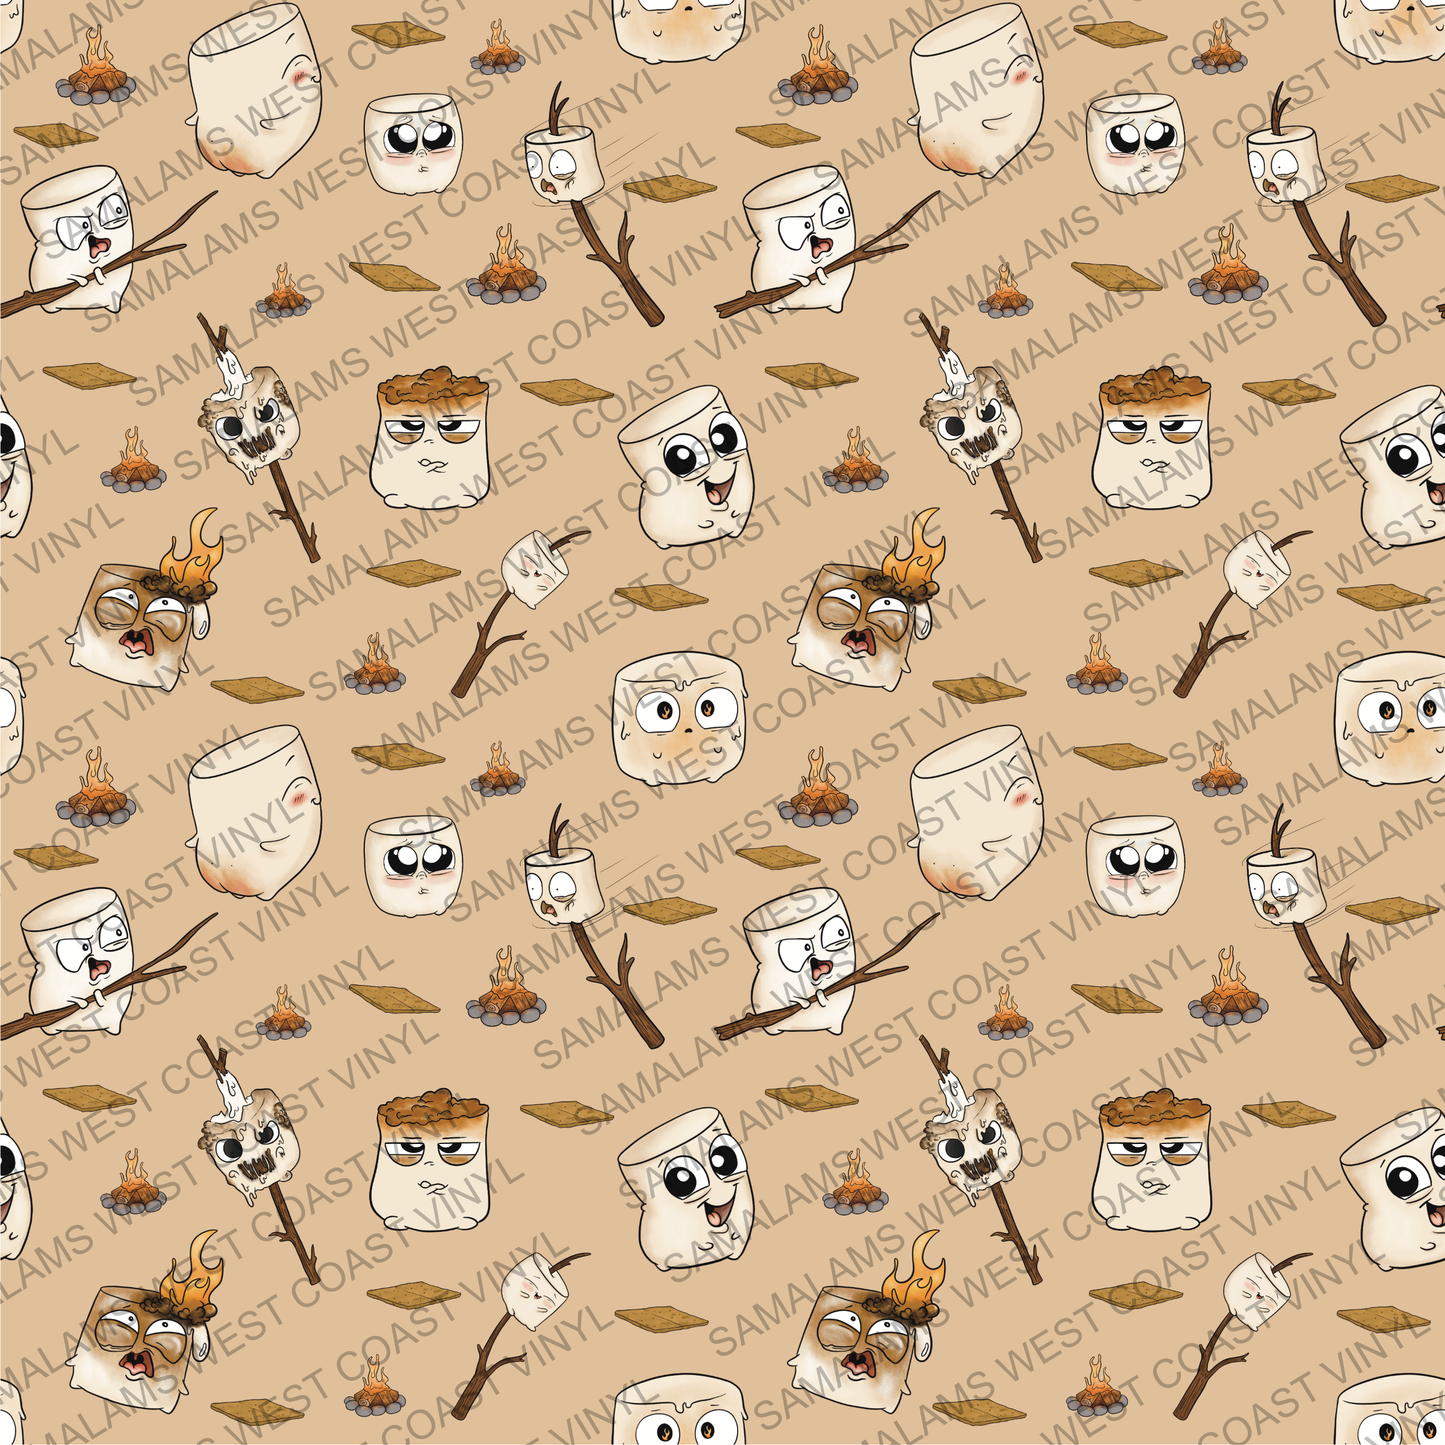 Toasted Marshmallows - Pack 1 (Seamless)